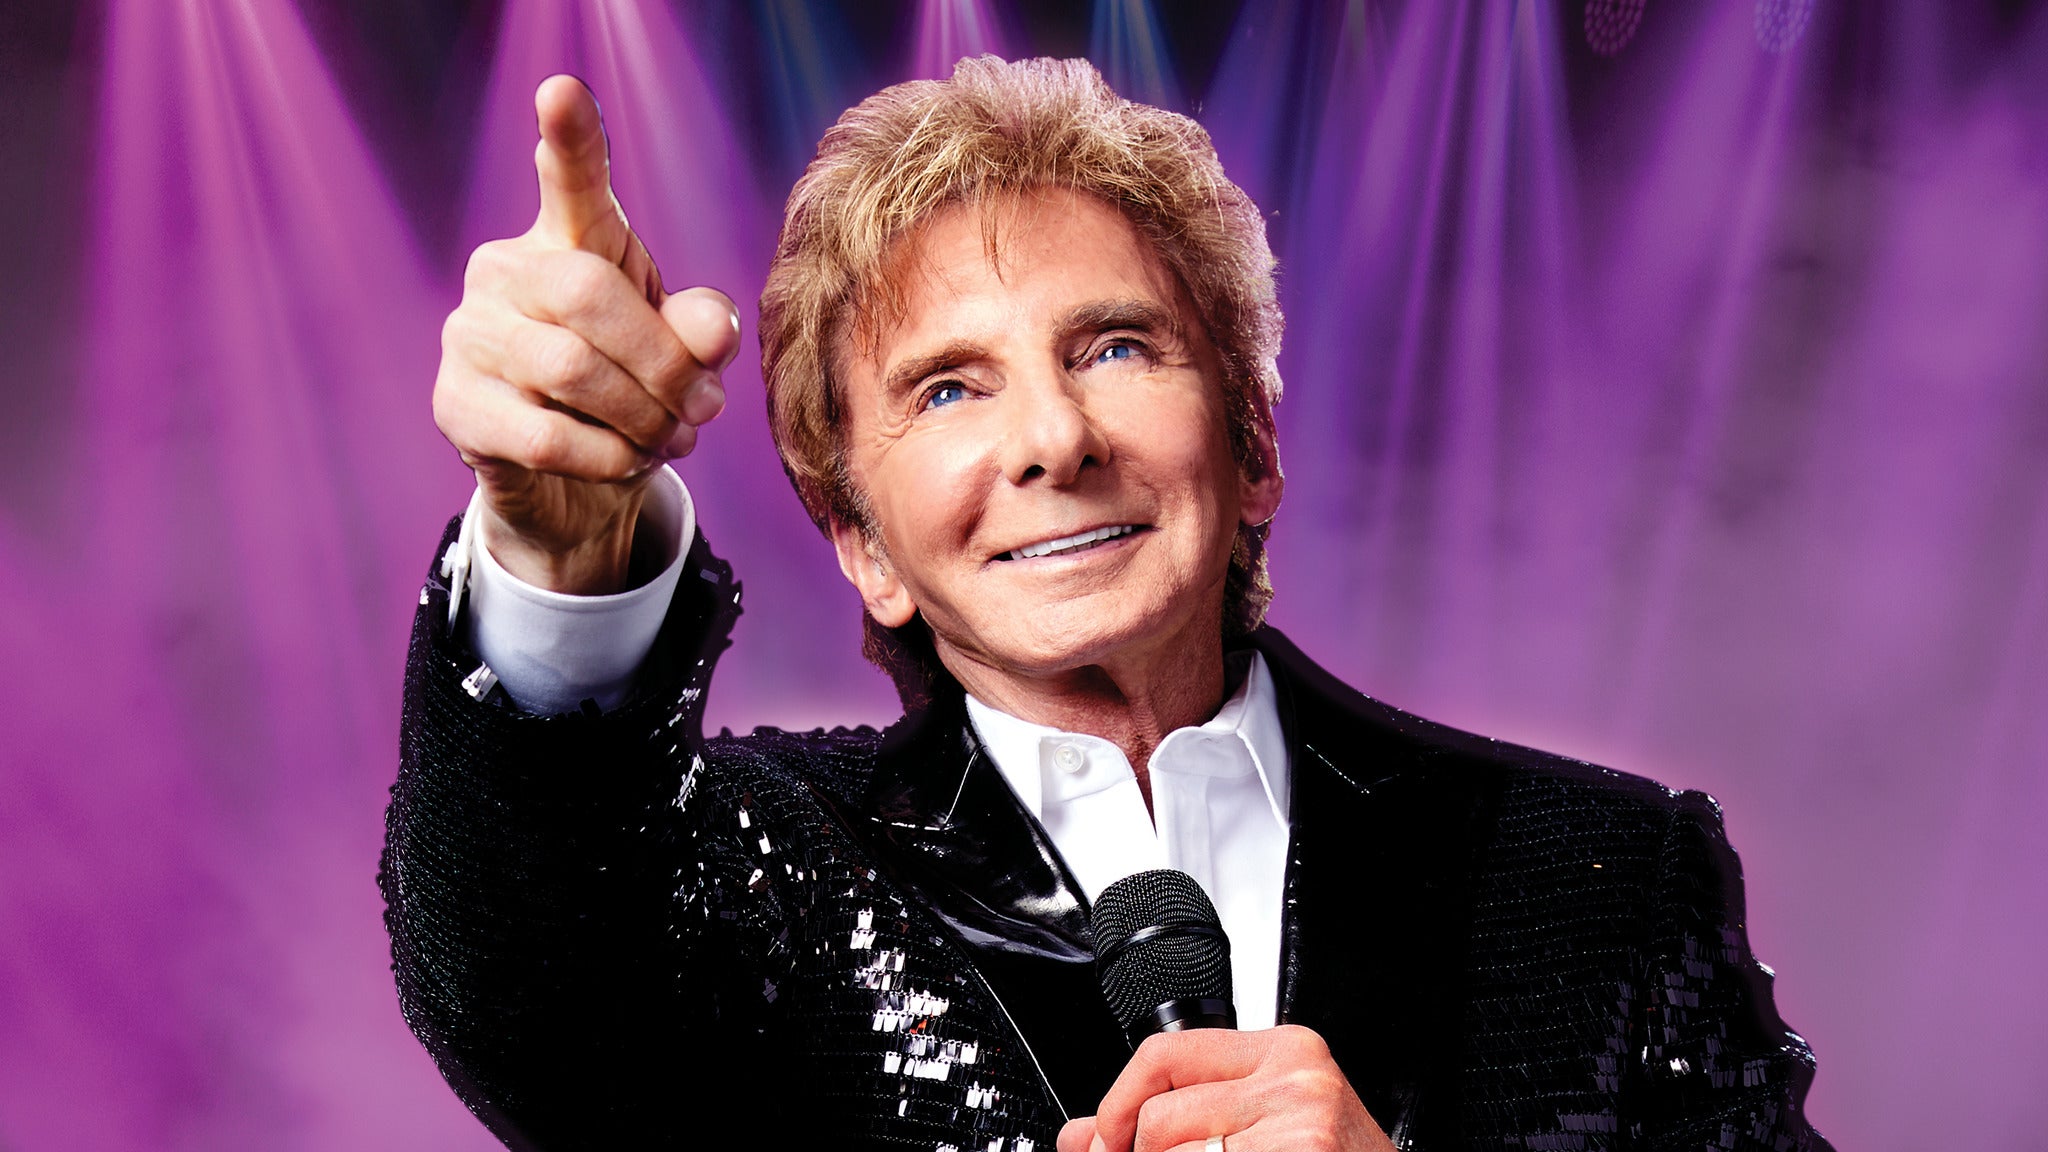 Barry Manilow Tickets, 2022 Concert Tour Dates Ticketmaster.